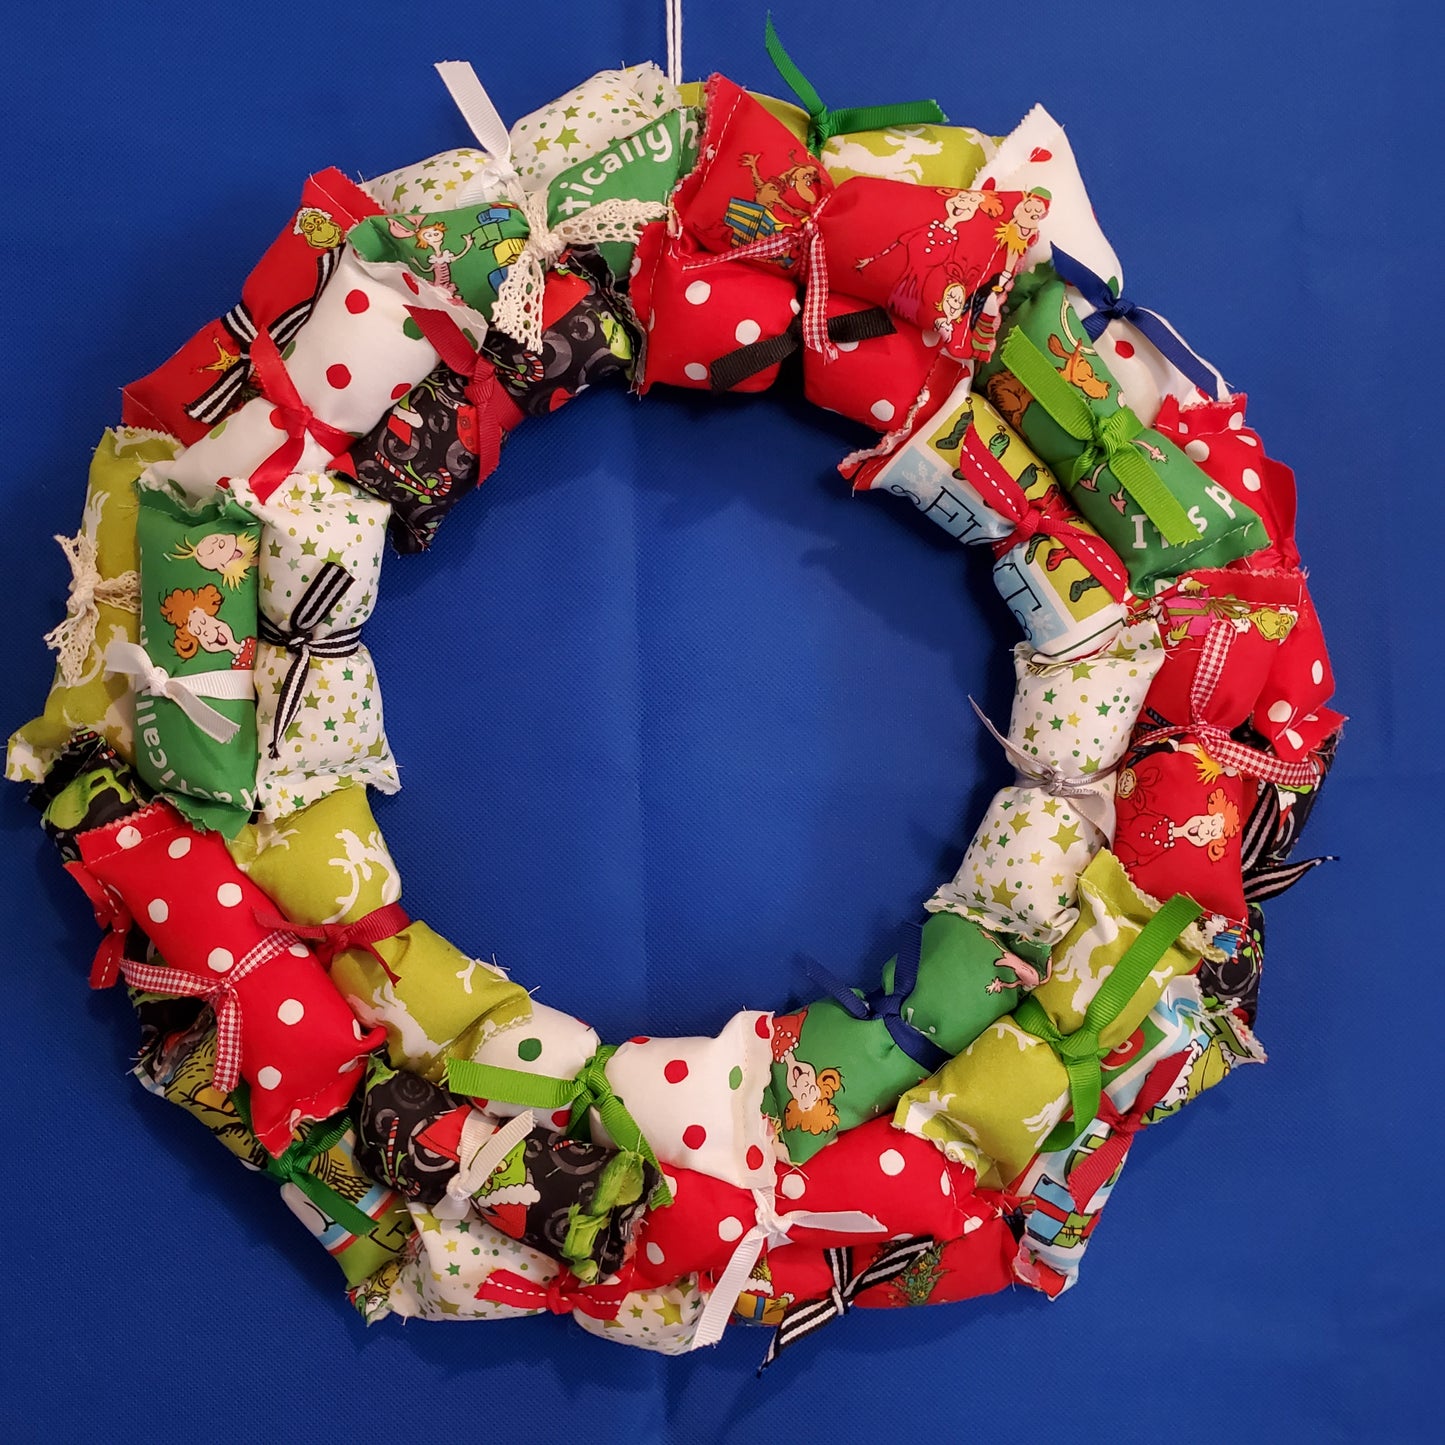 Grinch Theme Holiday Wreaths / Home Decor - Several Options Available